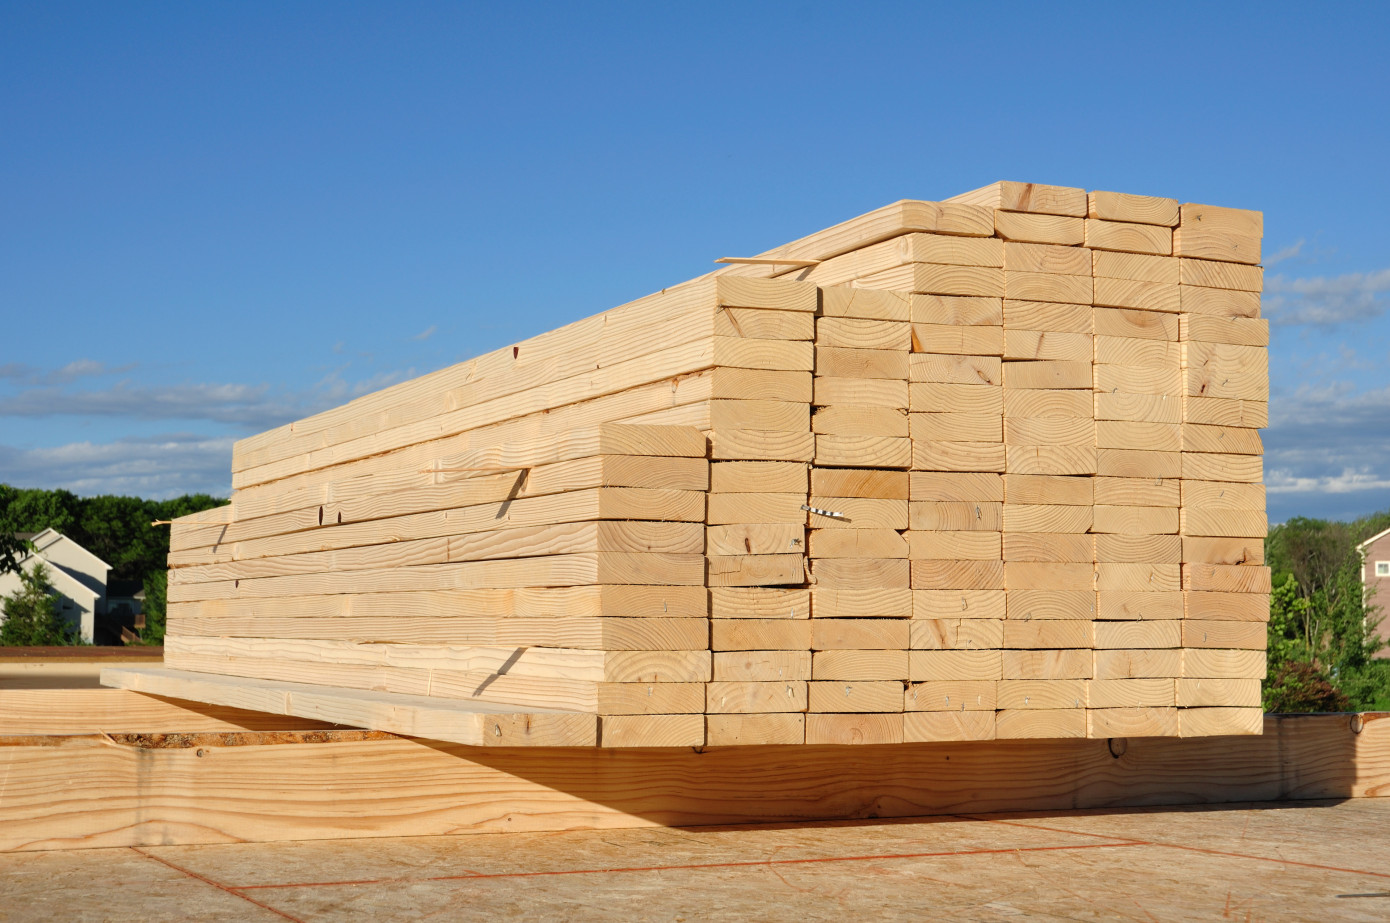 In January, price for lumber exported from Canada loses 6%